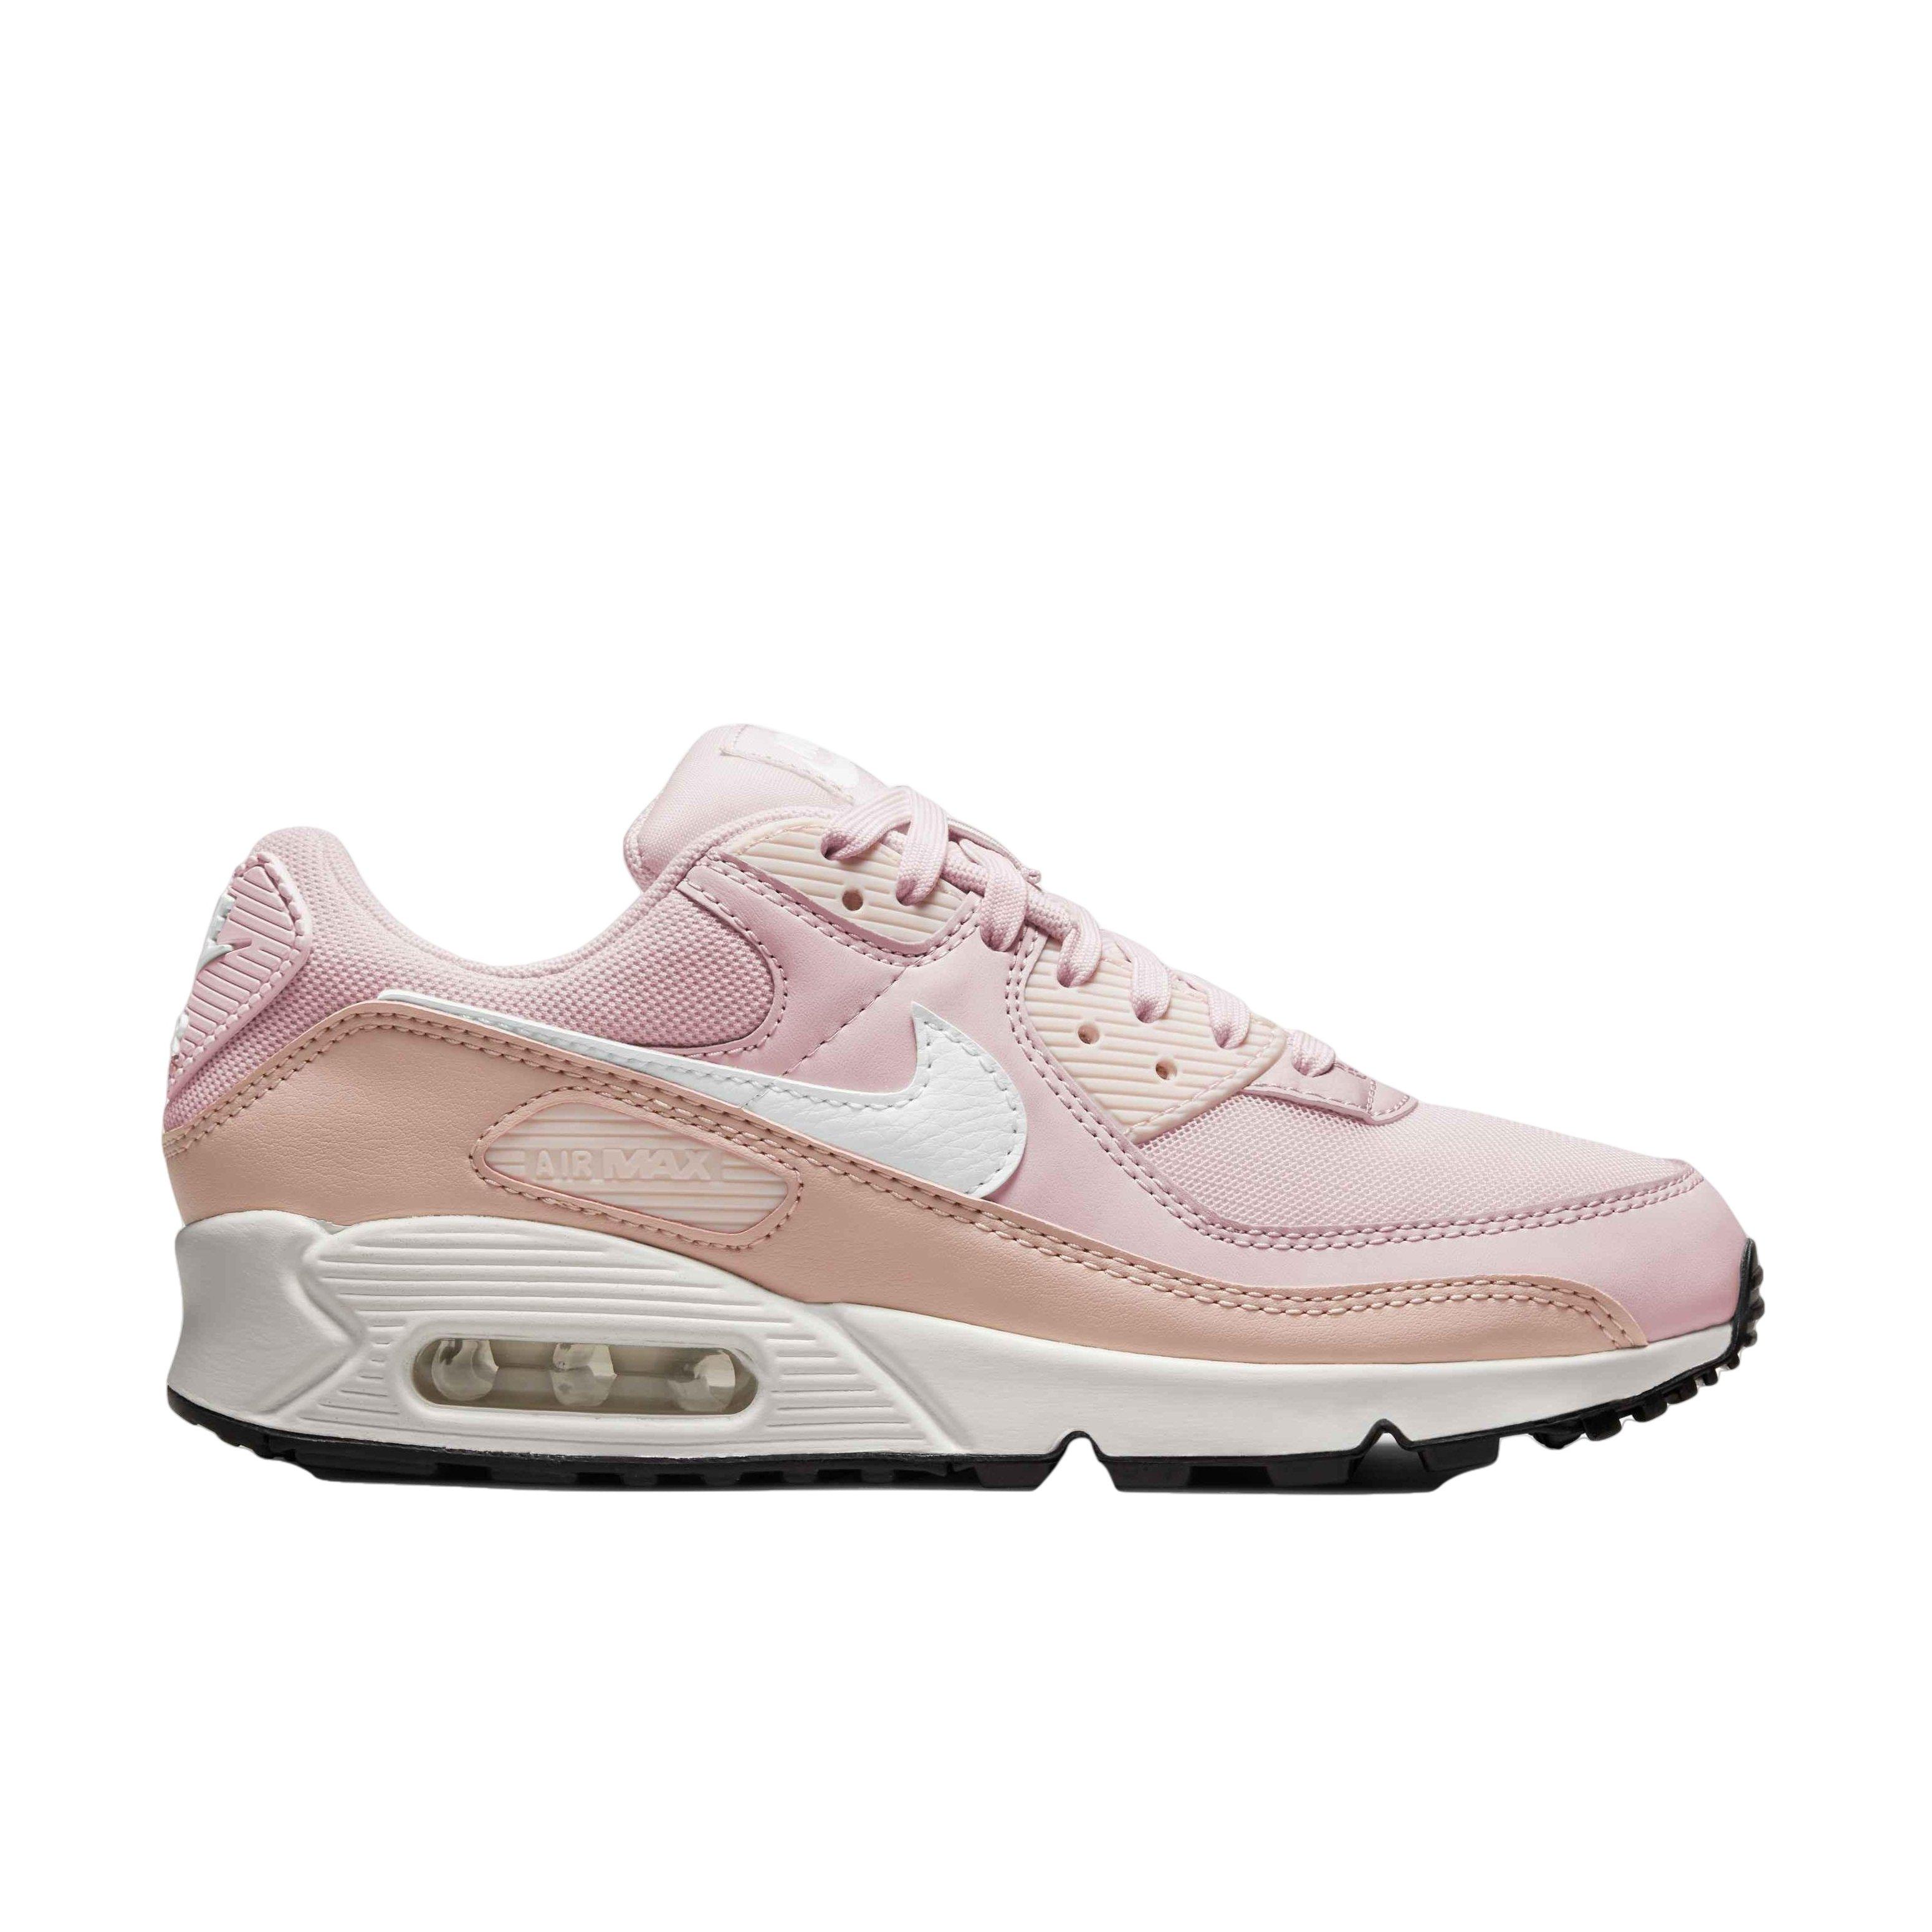 Air Max 90 "Barely Oxford" Women's Shoe